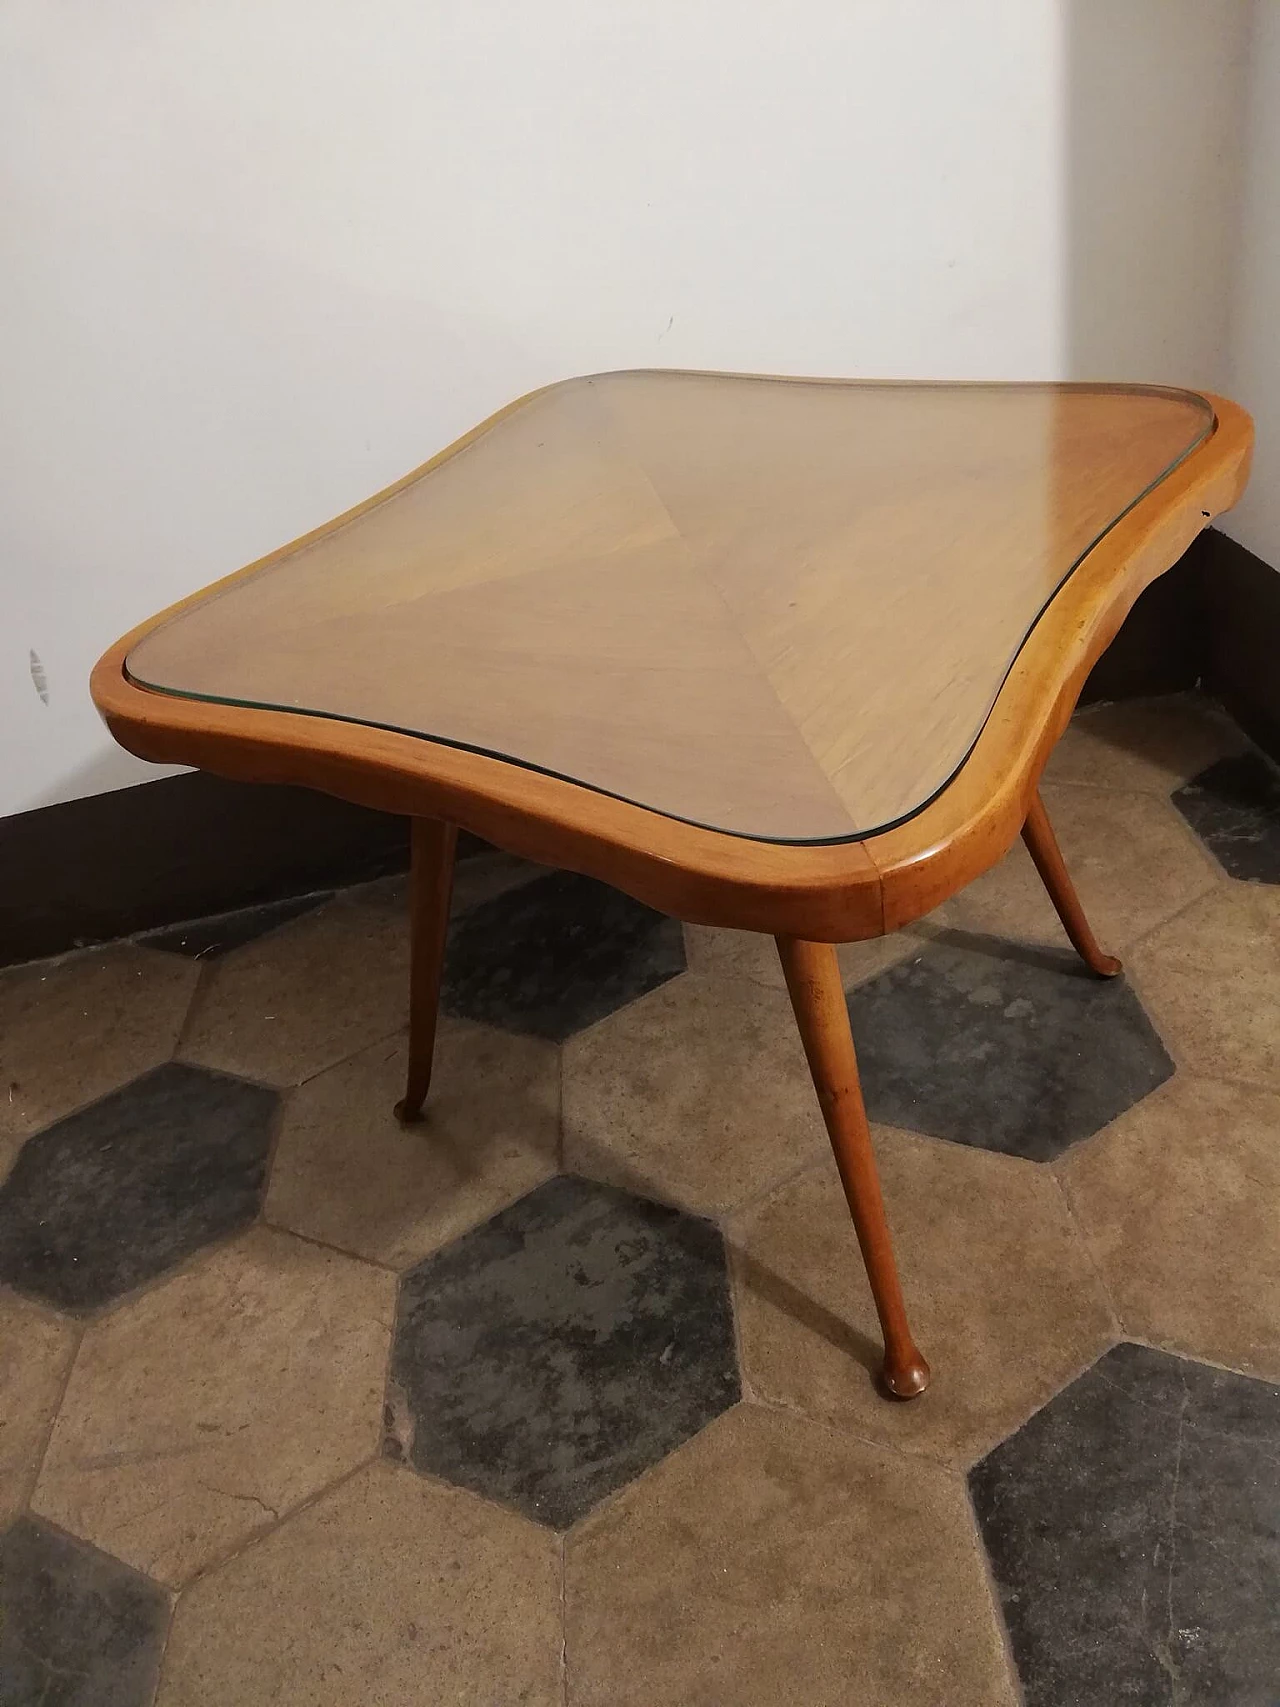 Wooden coffee table and glass top, 1950's 1083616